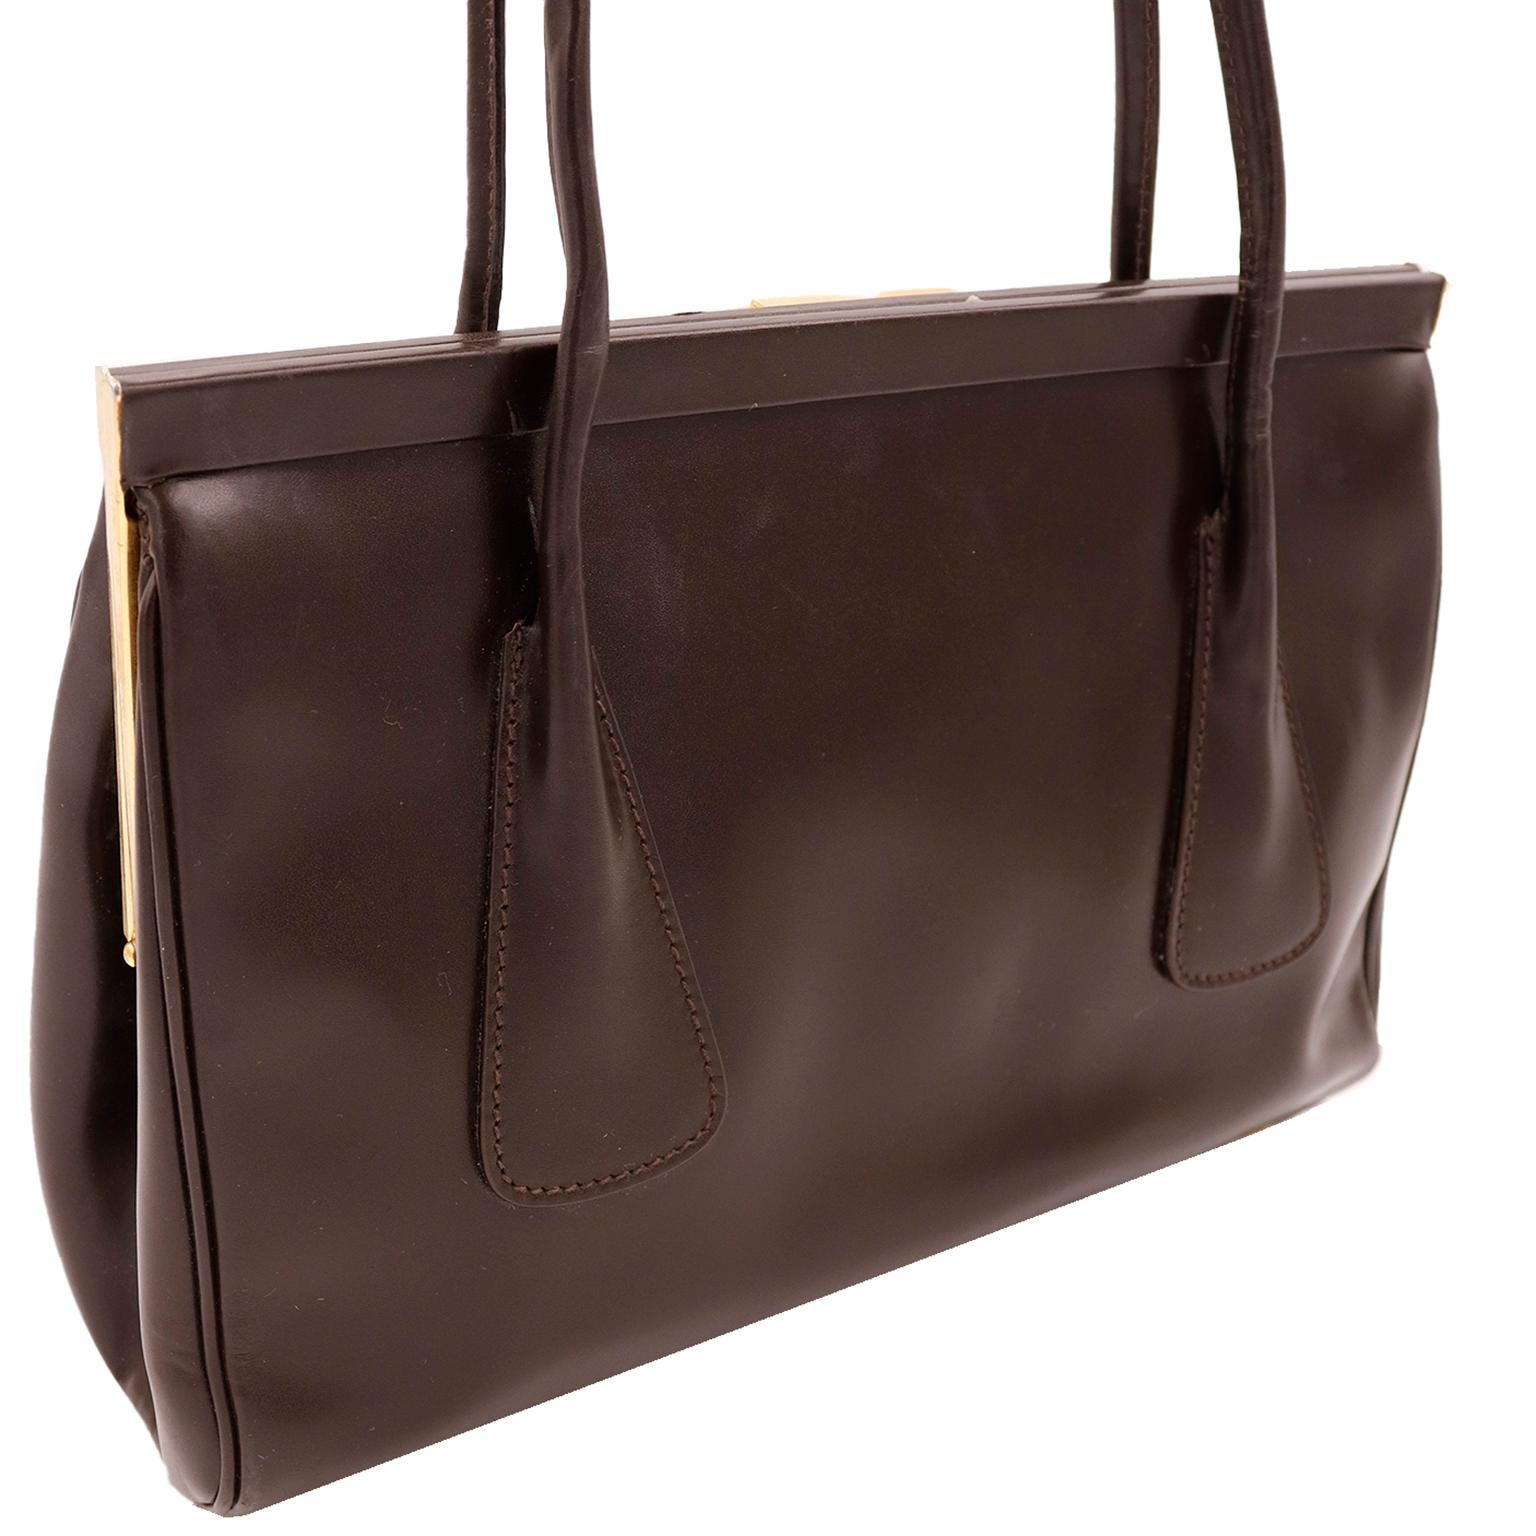 This luxe Escada dark chocolate brown leather handbag has double top handles and features a gold Escada name plate on the front. We love these kinds of bags because they elevate your daywear with instant sophistication! This classic bag has a hinged